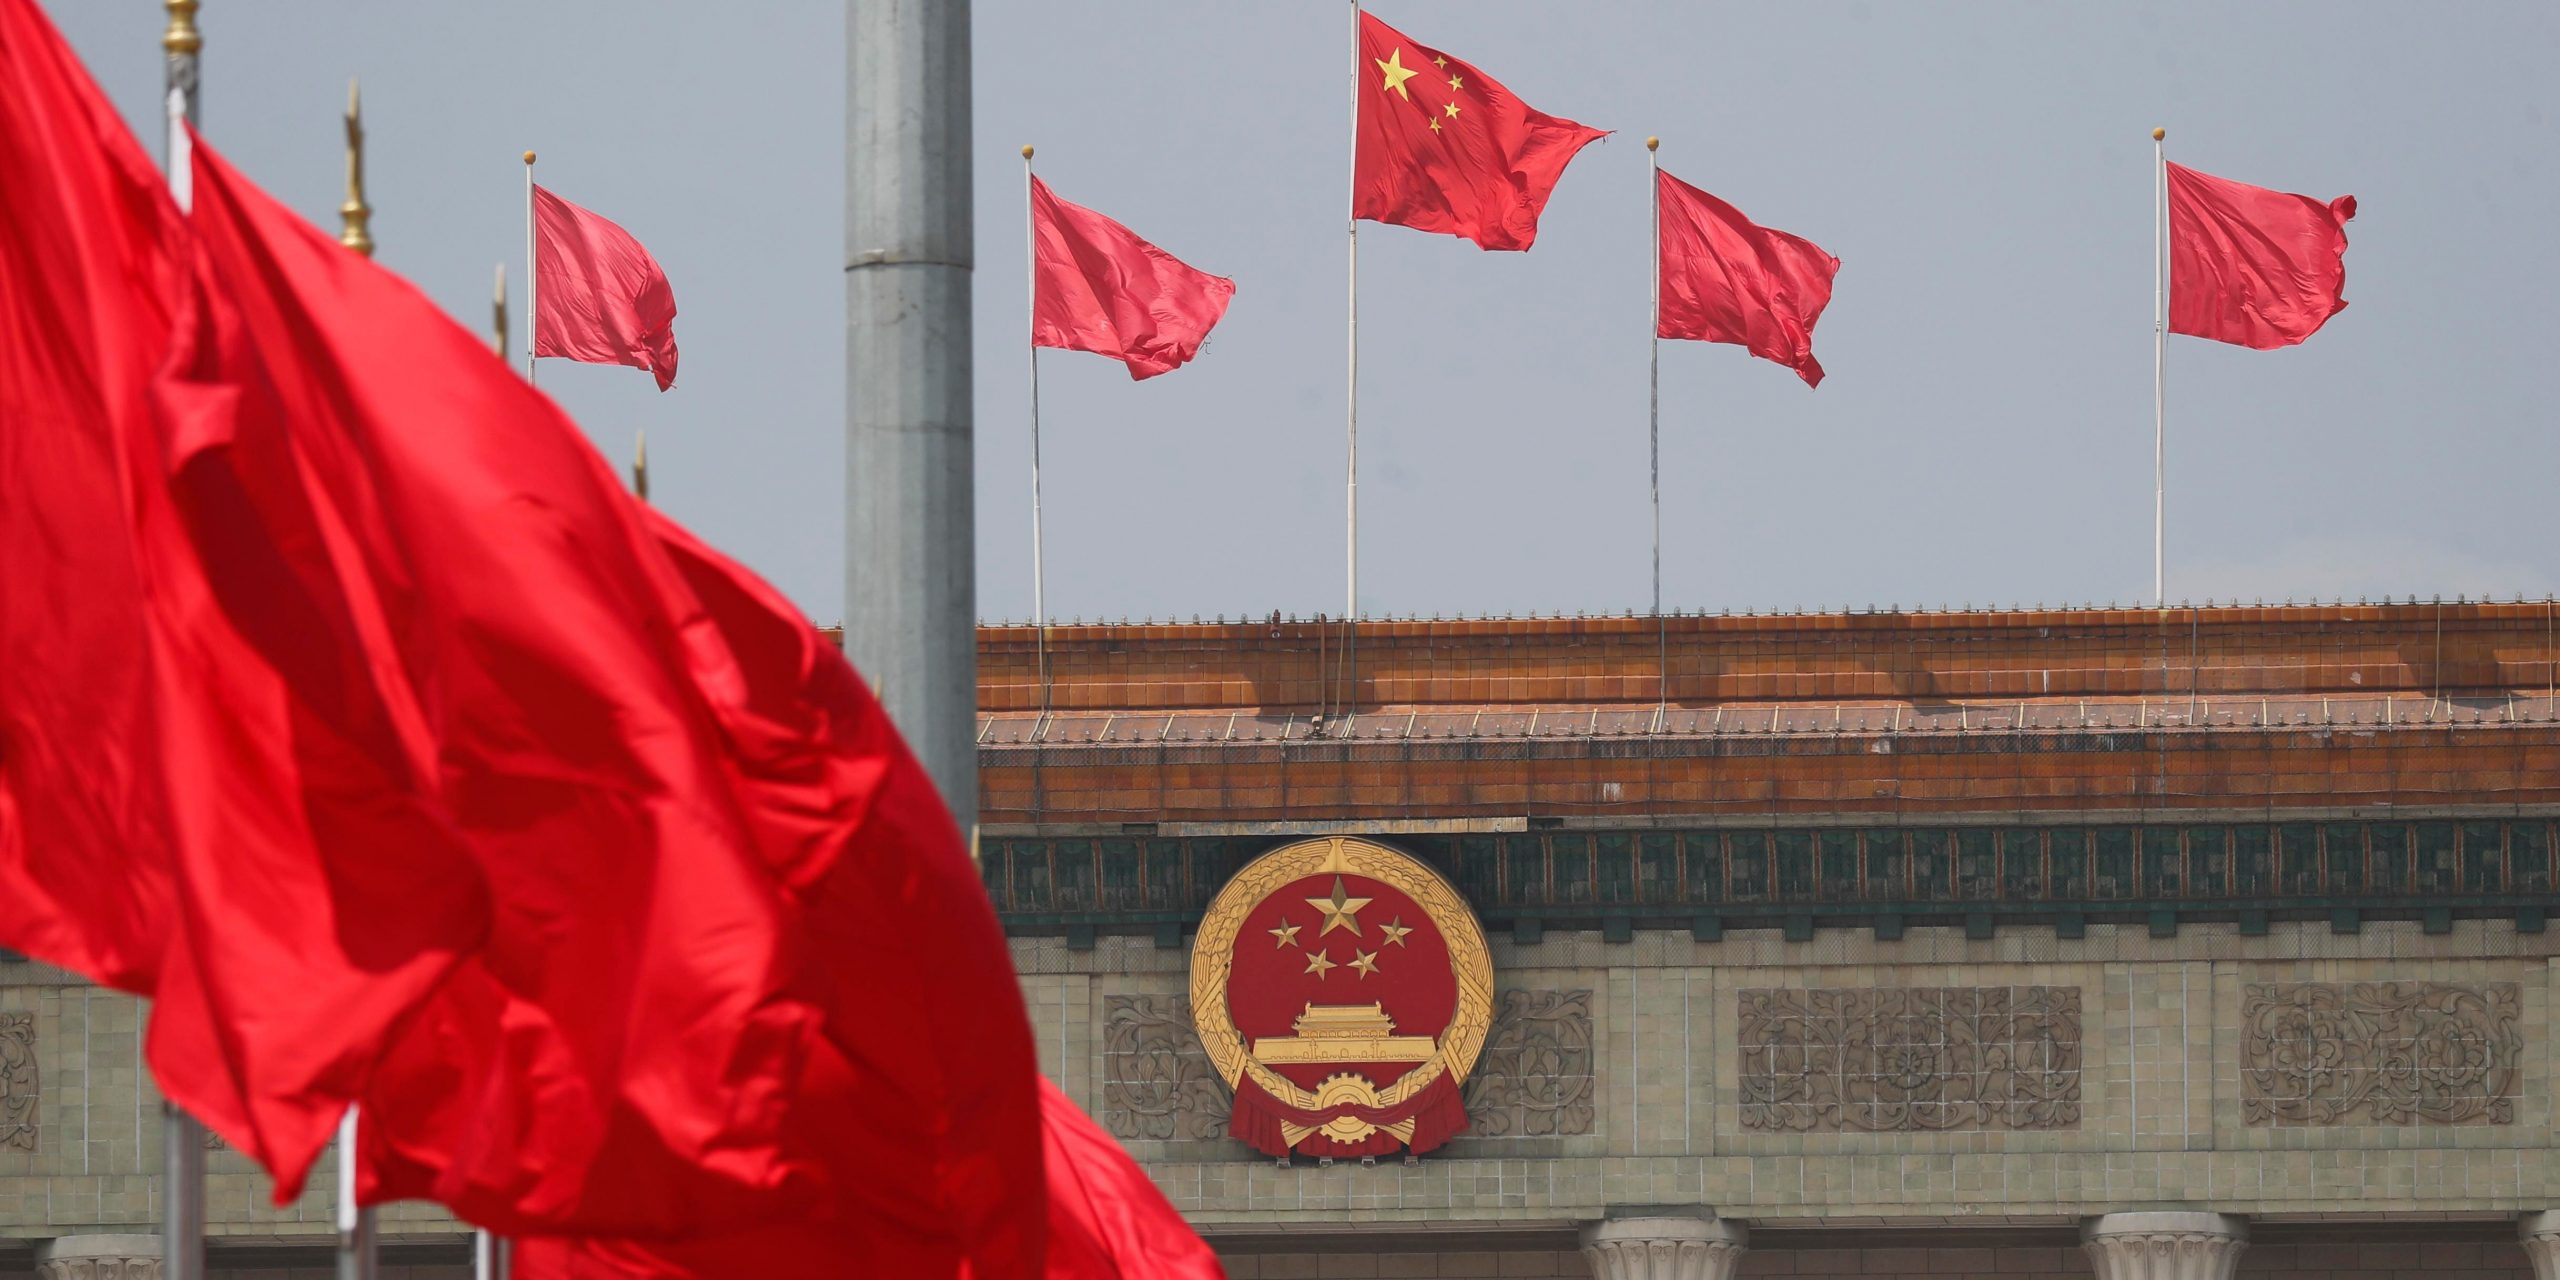 Red flags fly in front of the Great Hall of the People as the third session of the 13th National People's Congress (NPC) holds opening meeting on May 22, 2020 in Beijing, China.